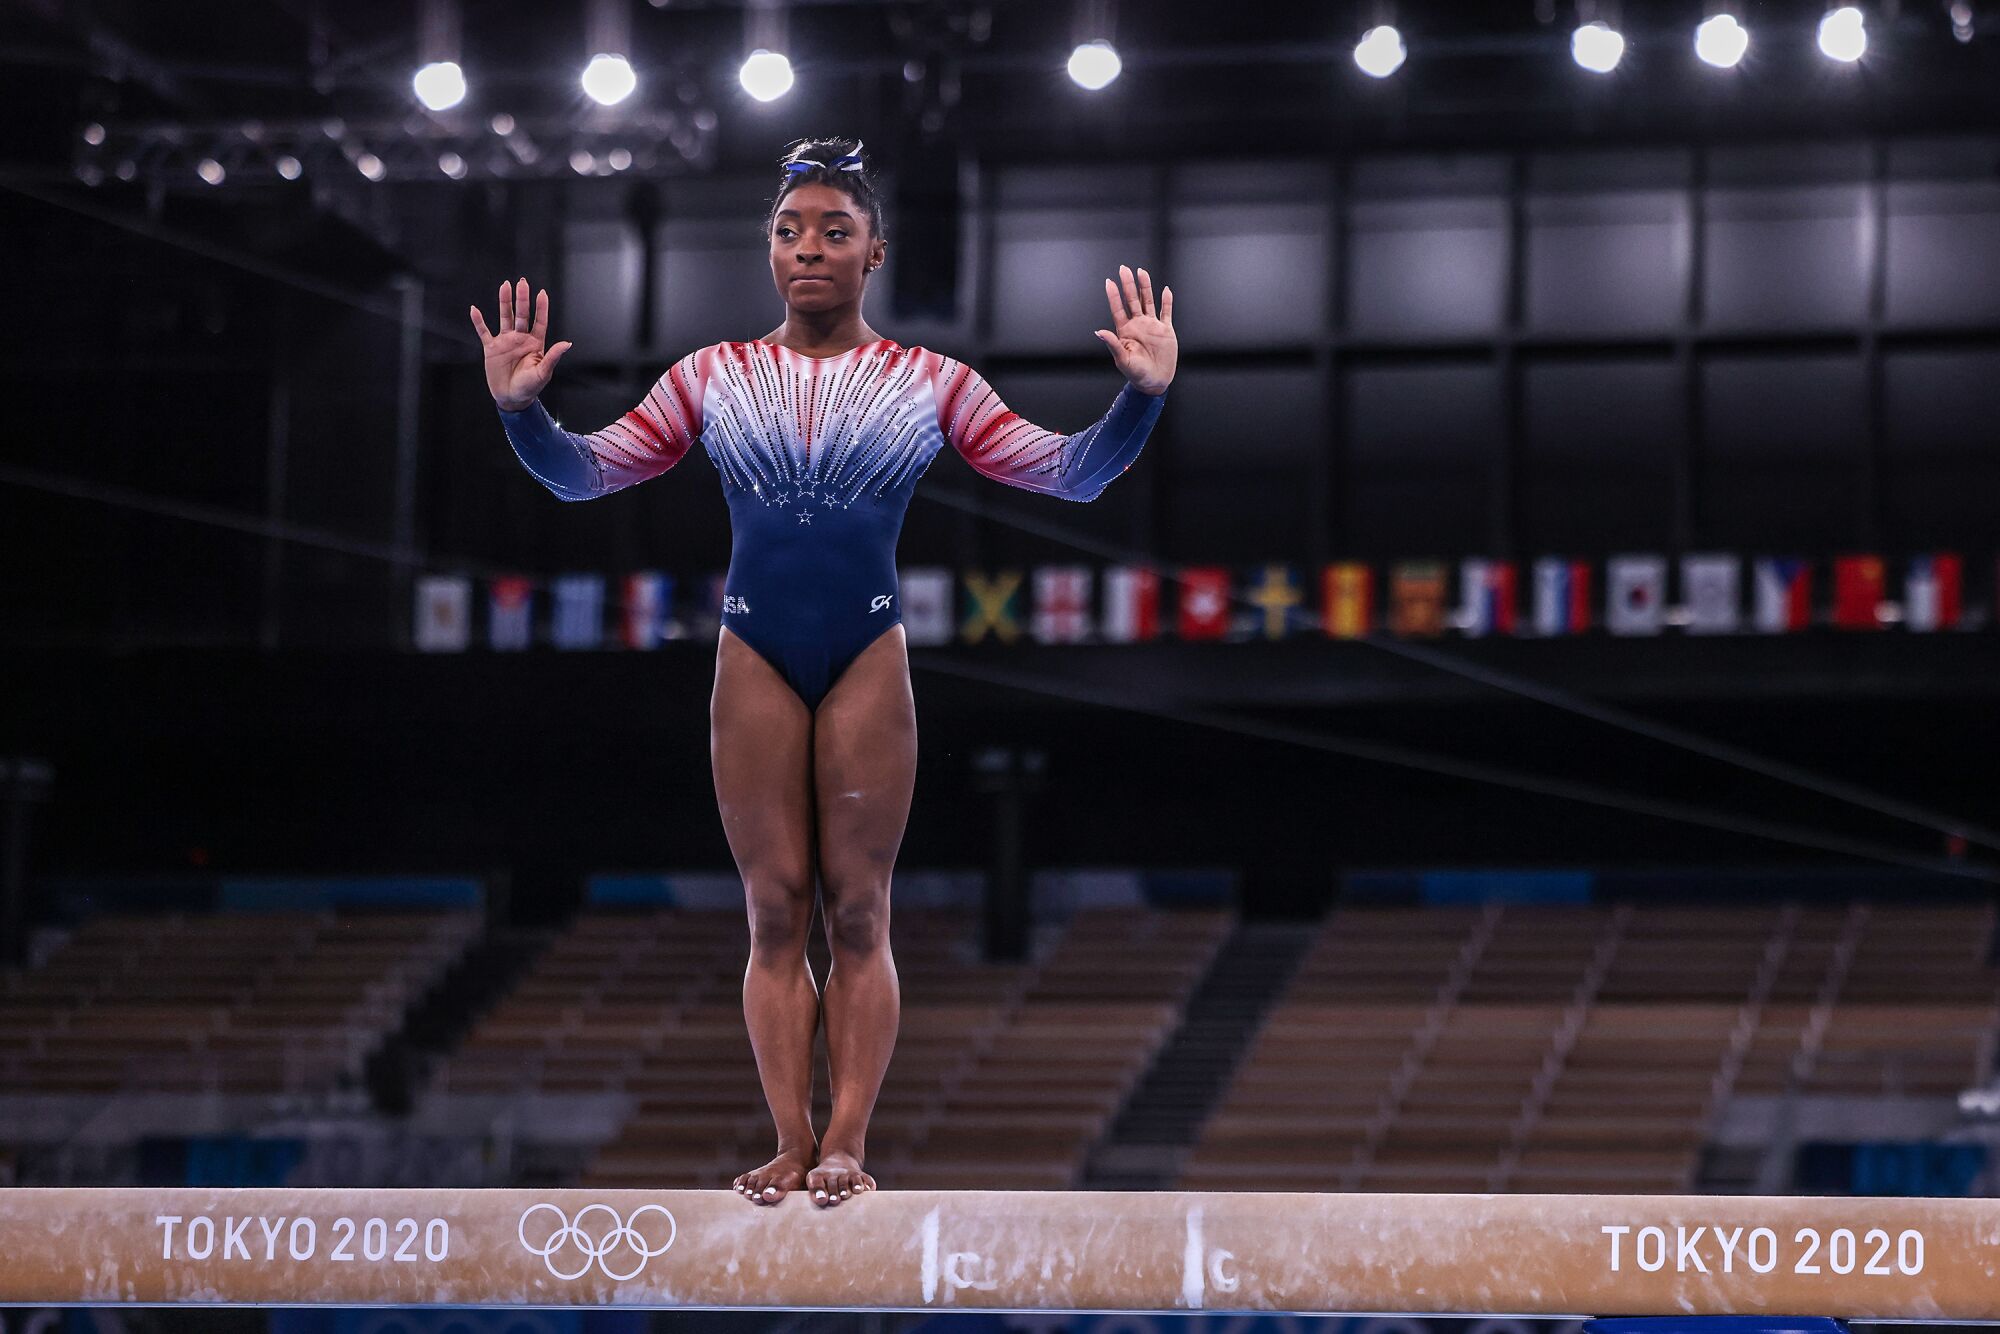 Simone Biles practices her balance beam routine before capturing bronze in the event.